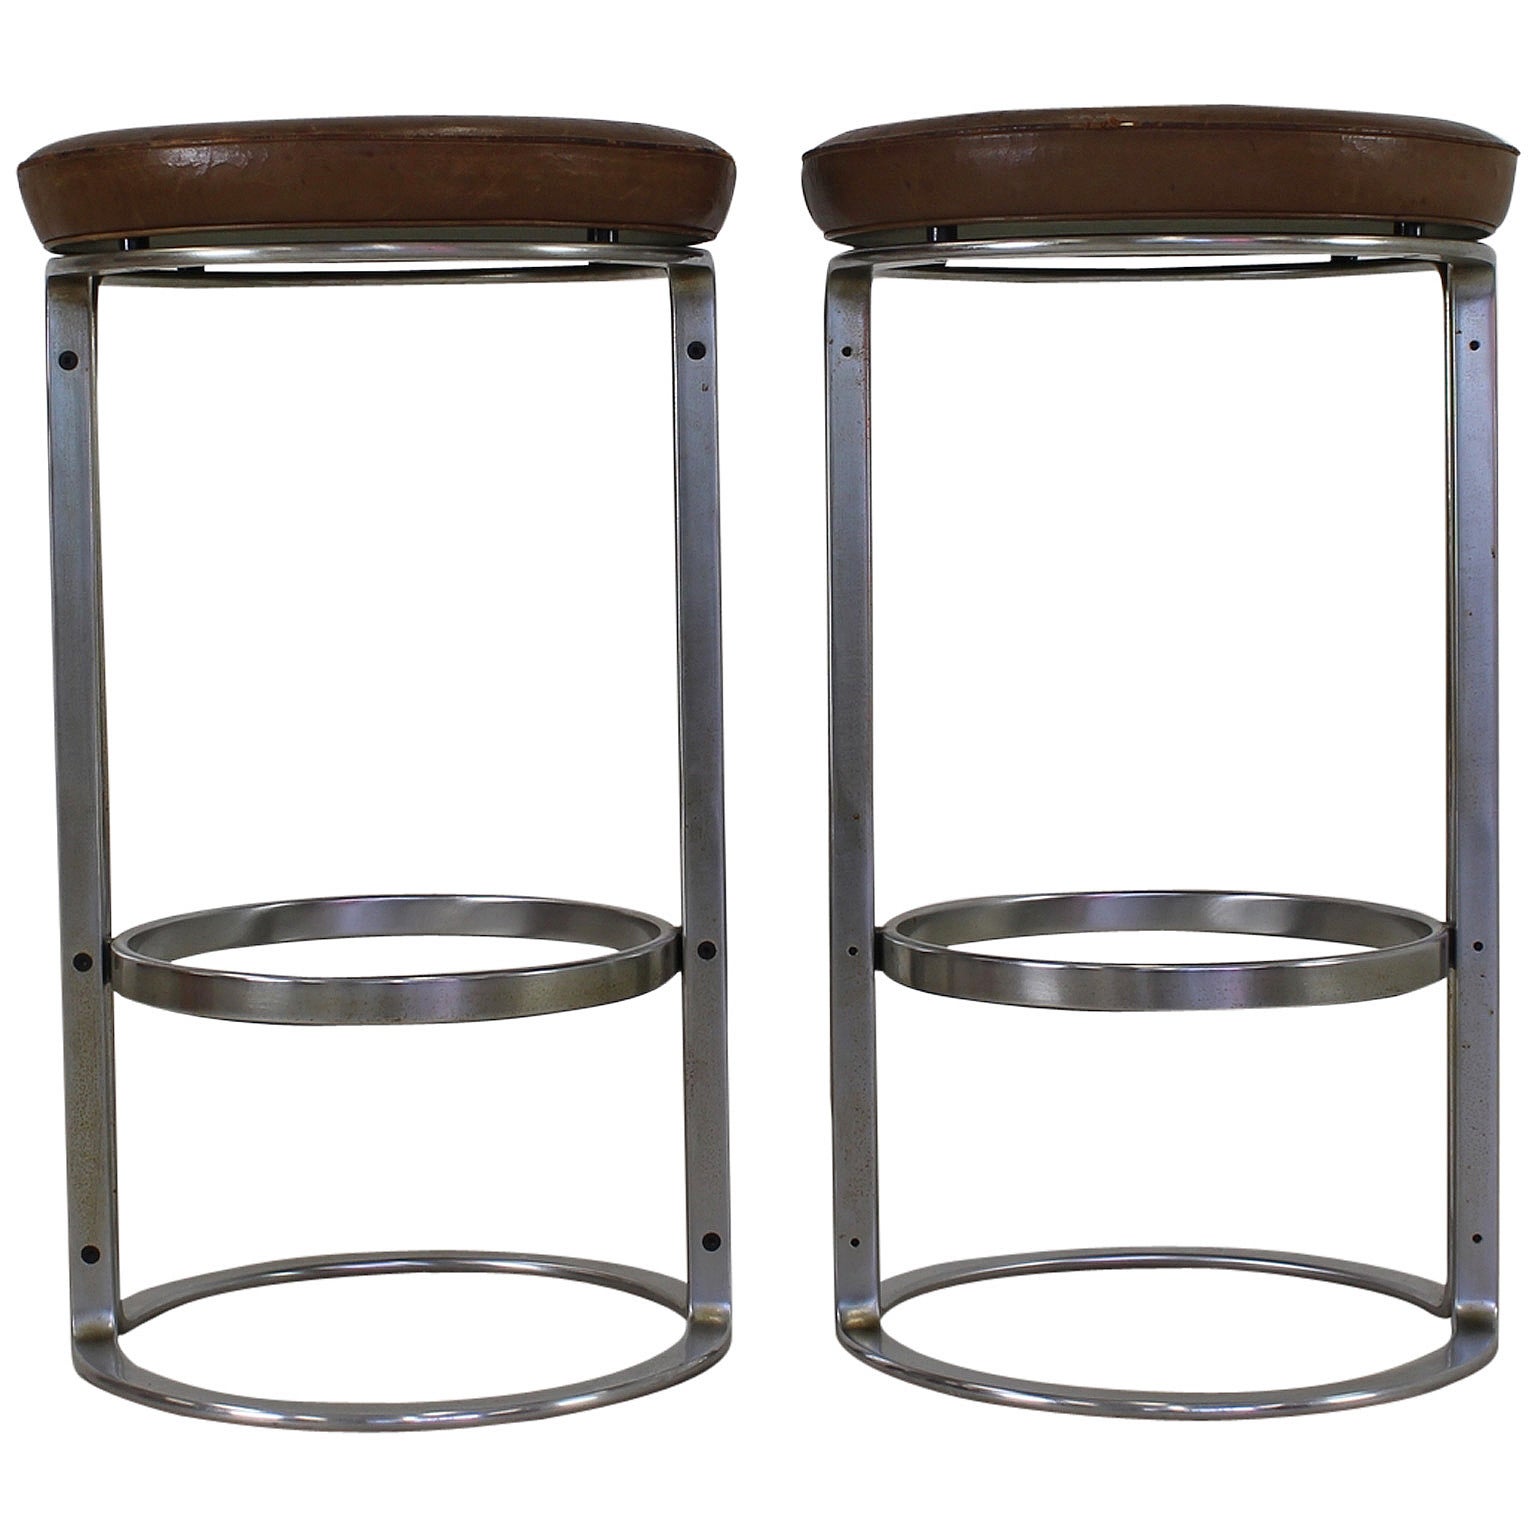 Two Scarce Kill International Chrome-Plated Steel Bar Stools by Horst Bruning For Sale